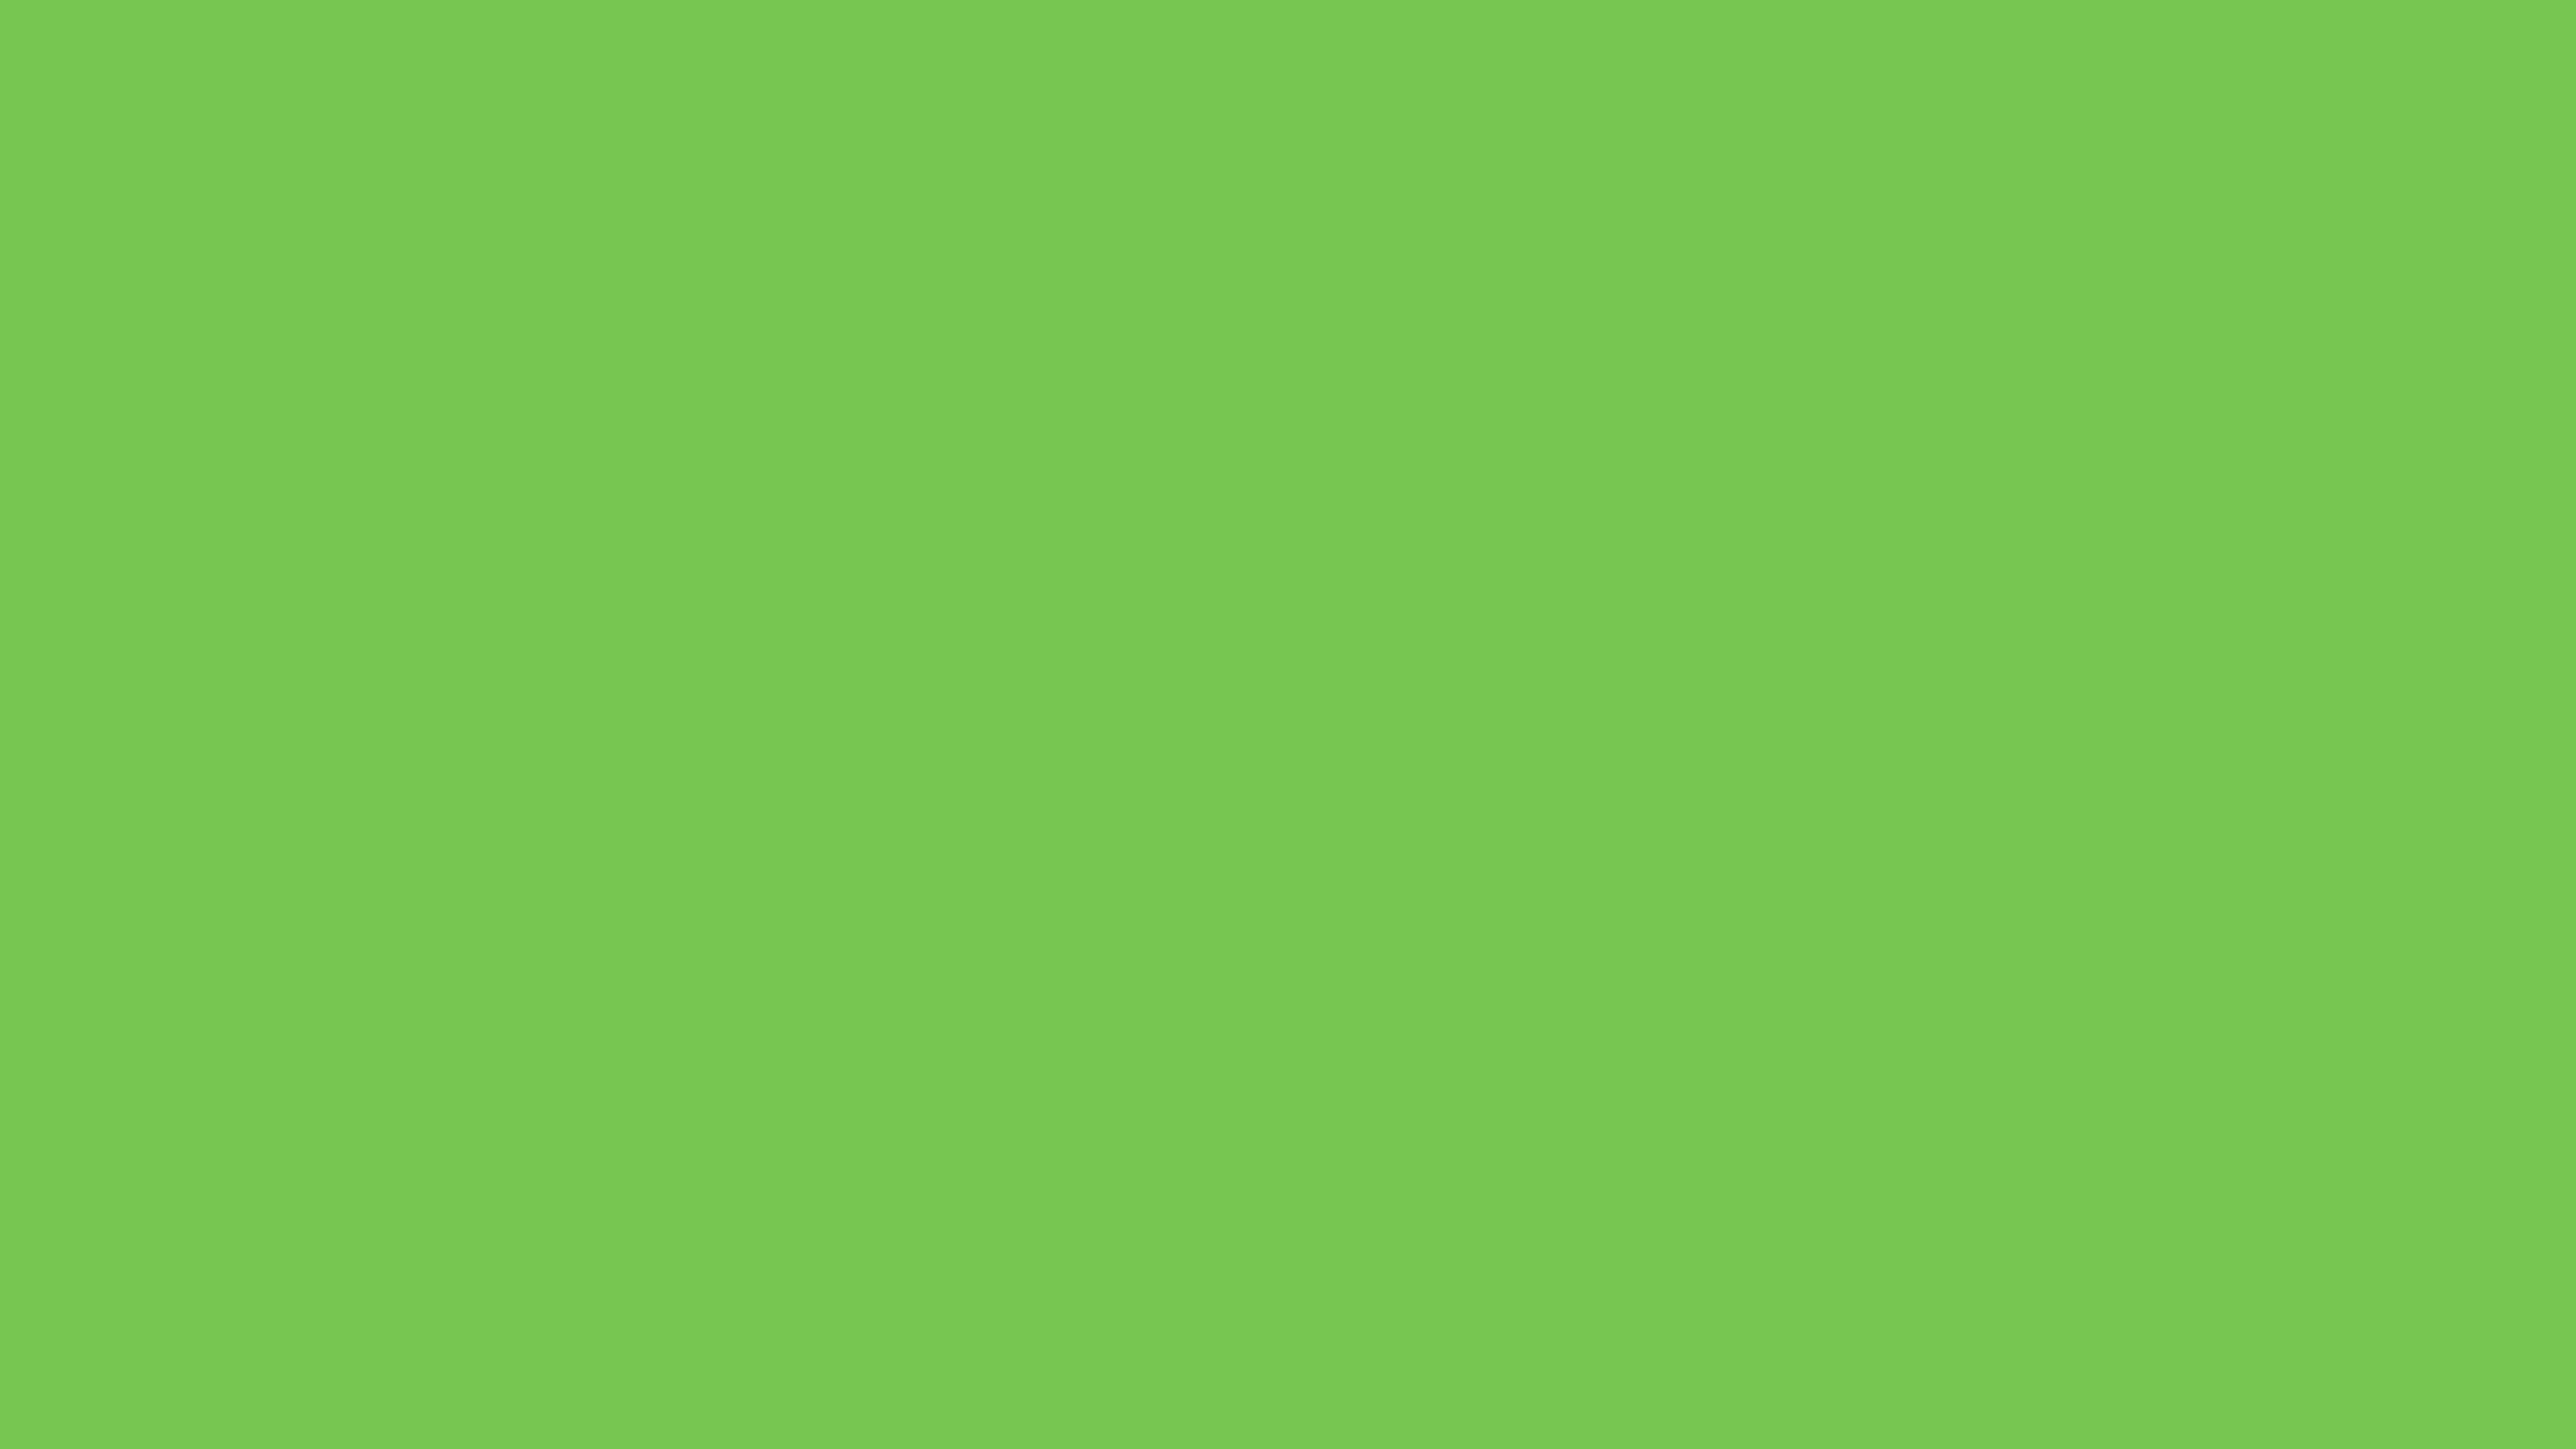 Green Flash Solid Color Background Image | Free Image Generator